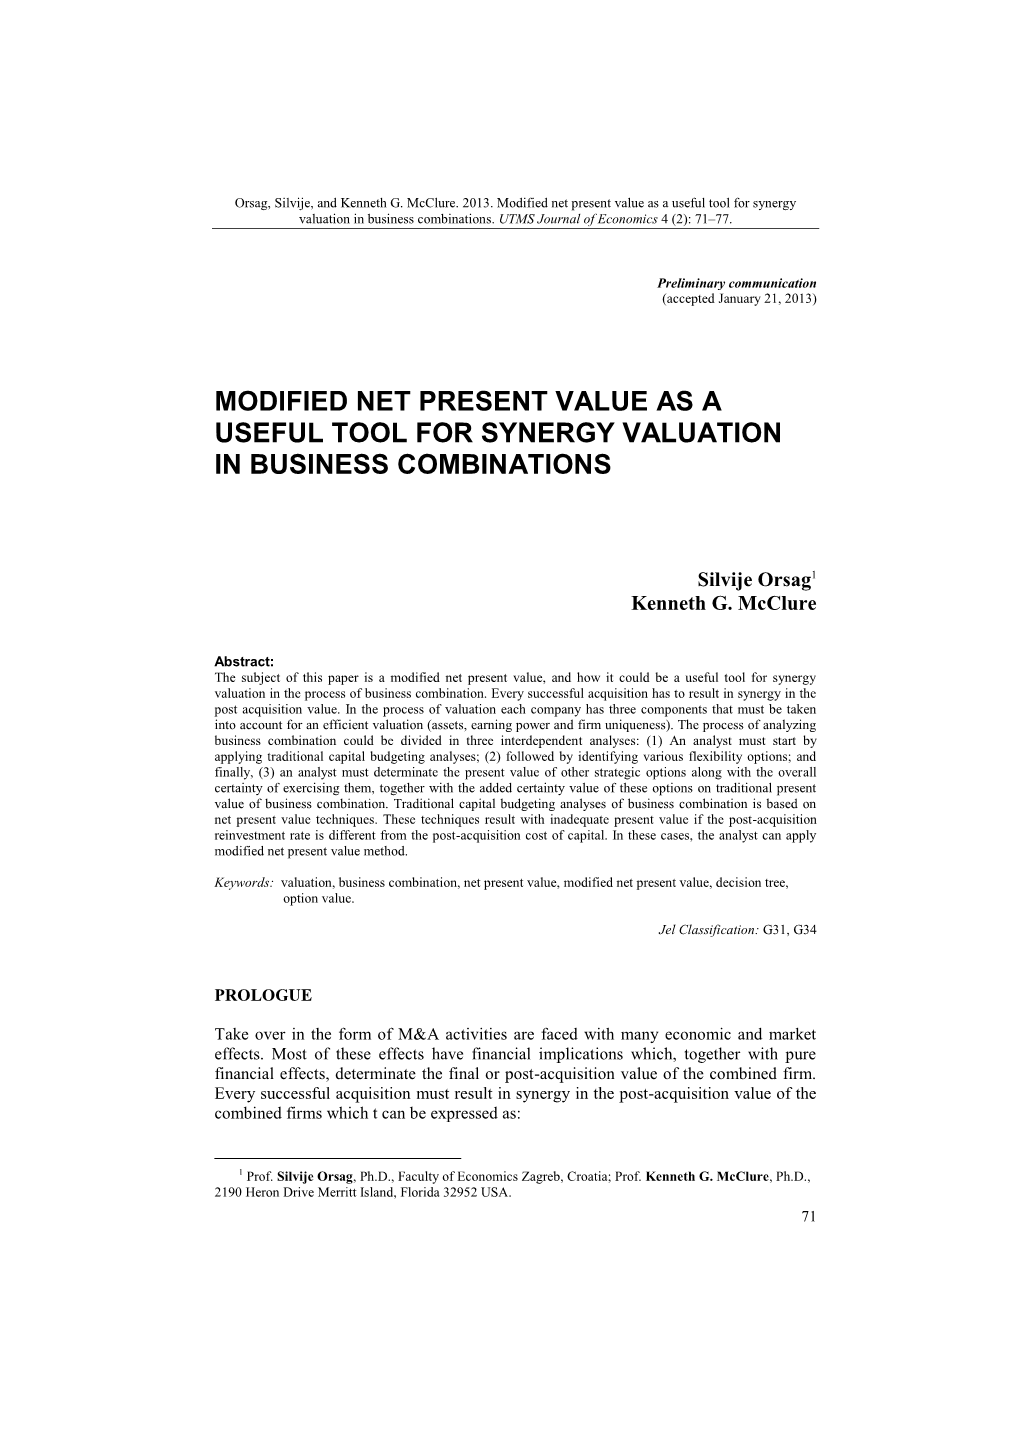 Modified Net Present Value As a Useful Tool for Synergy Valuation in Business Combinations